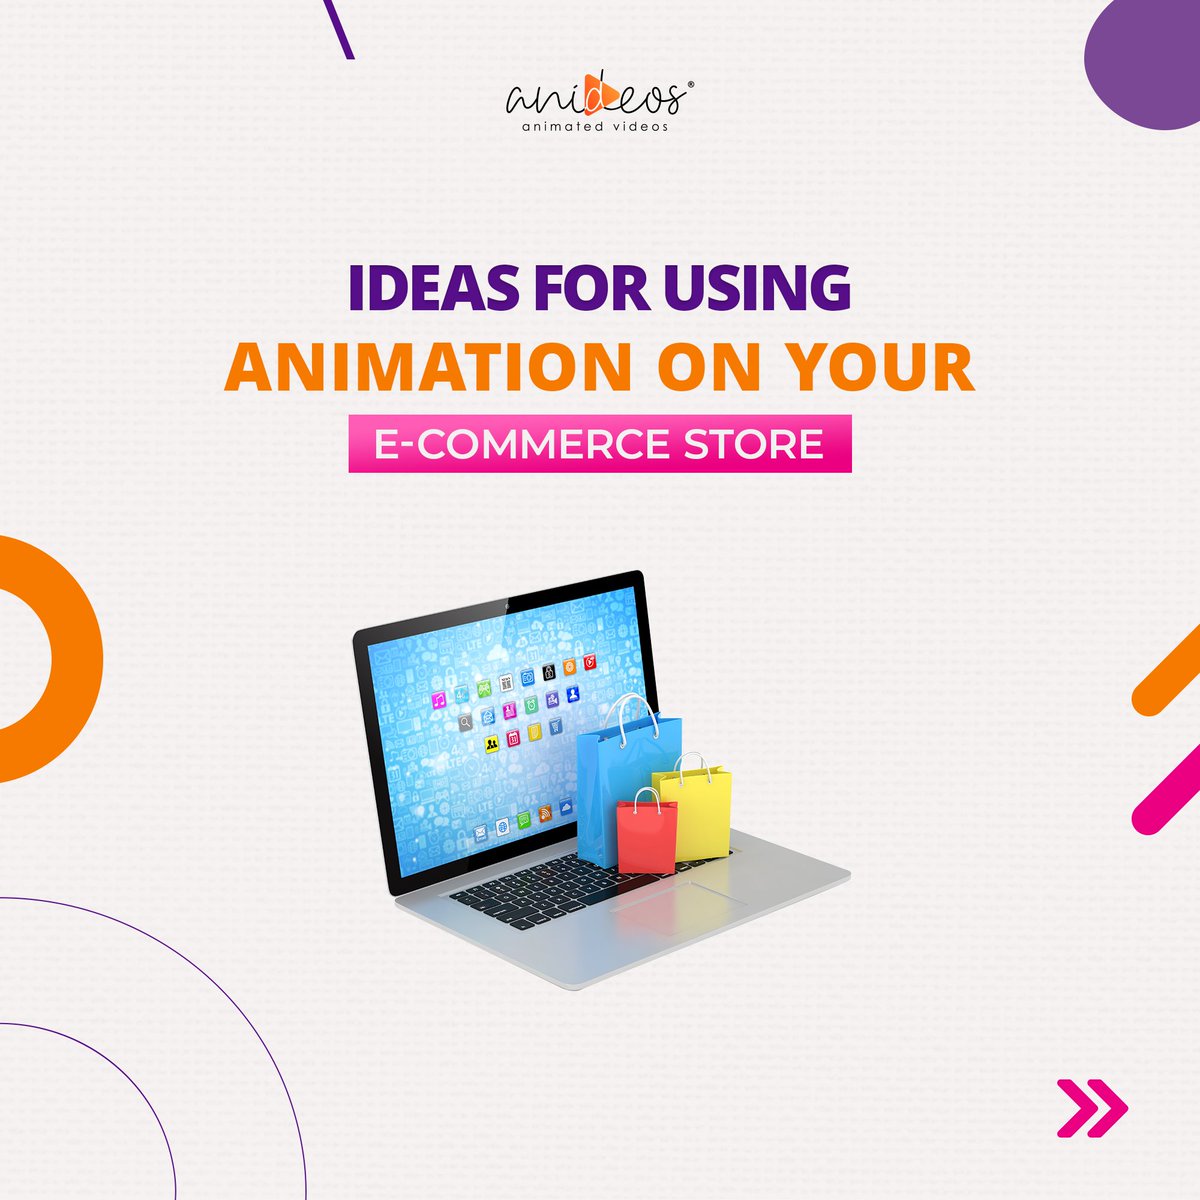 Why settle for ordinary when you can go animated?

Explore the 5 game-changing perks that animated explainer videos bring to your E-commerce table.

#anideos #ecommerce #animations #infographic #SocialMedia #videos #2D #2danimation #3D #animations #3danimation #trends2024